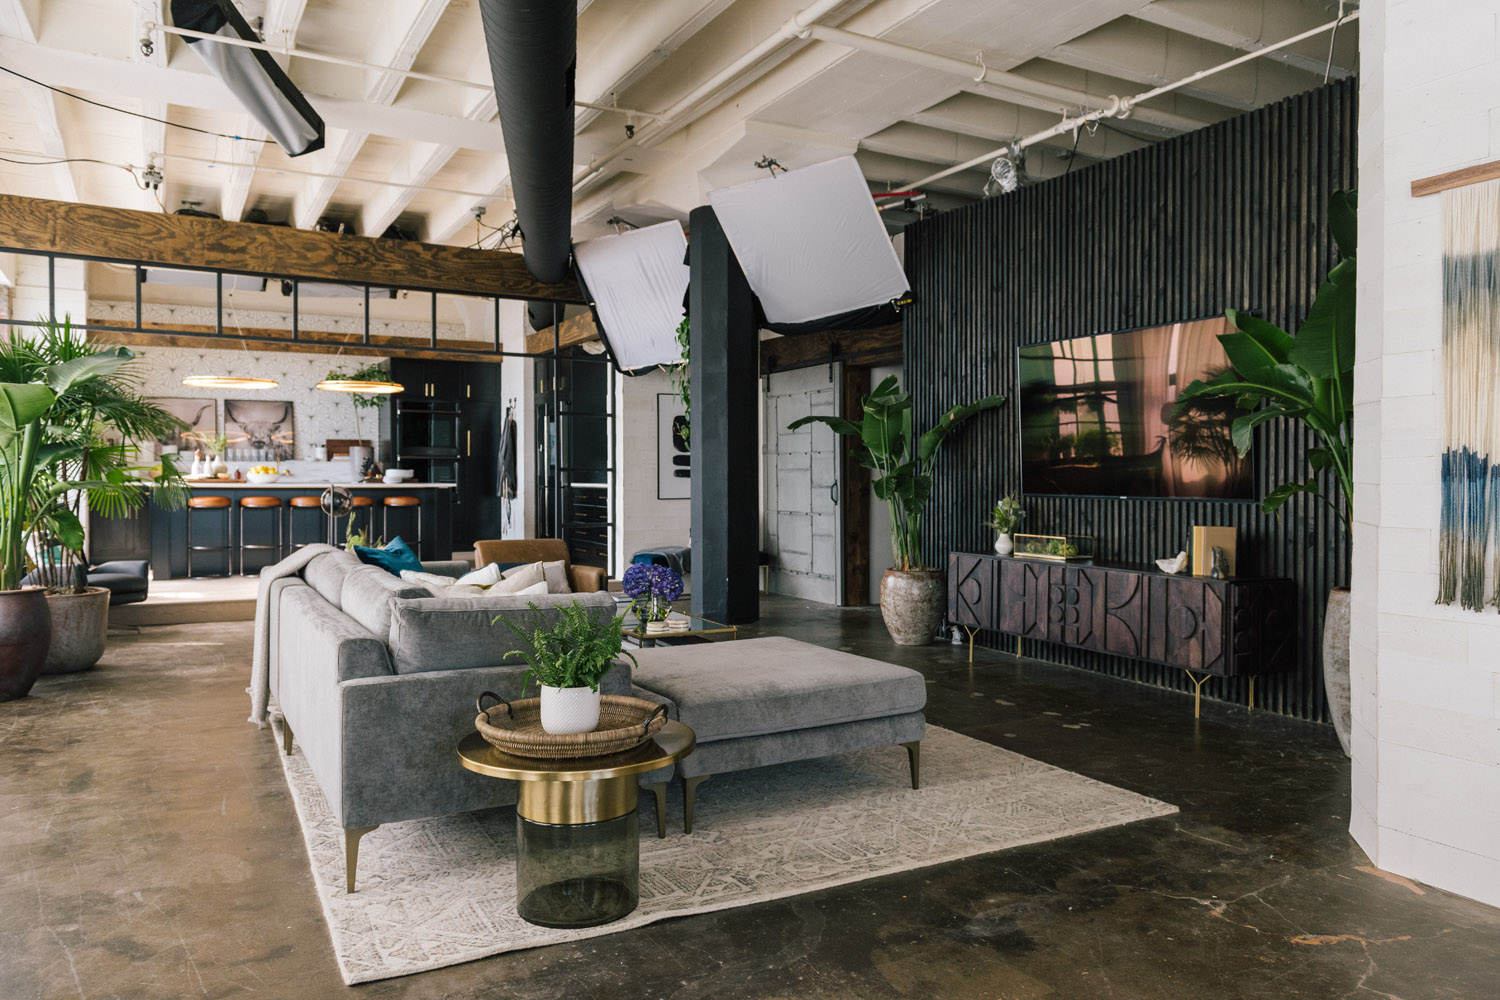 Stills from inside the Season Three "Queer Eye" loft, designed by cast member Bobby Berk in collaboration with West Elm. 